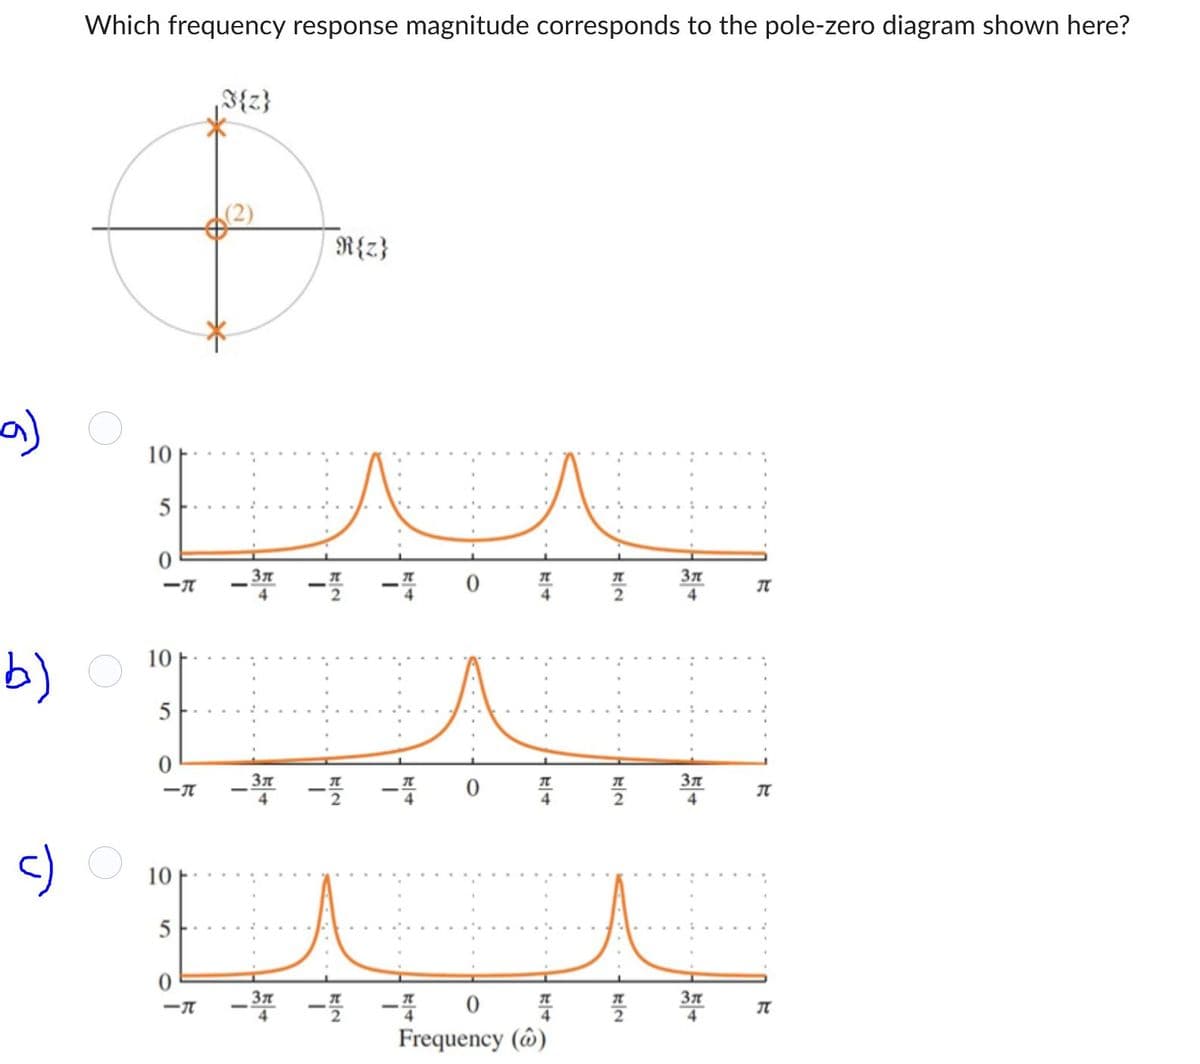 Which frequency response magnitude corresponds to the pole-zero diagram shown here?
I{z}
(2)
B
a)
10
5
0
<-π
R{z}
м
3π
0
Π
Π
Зл
π
4
b)
10
5
0
-π
10
5
-3
4
-플
π
4
2
3π
4
πT
0
-π
-37-77
-%
-770
H
3π
πT
4
4
Frequency (ŵ)